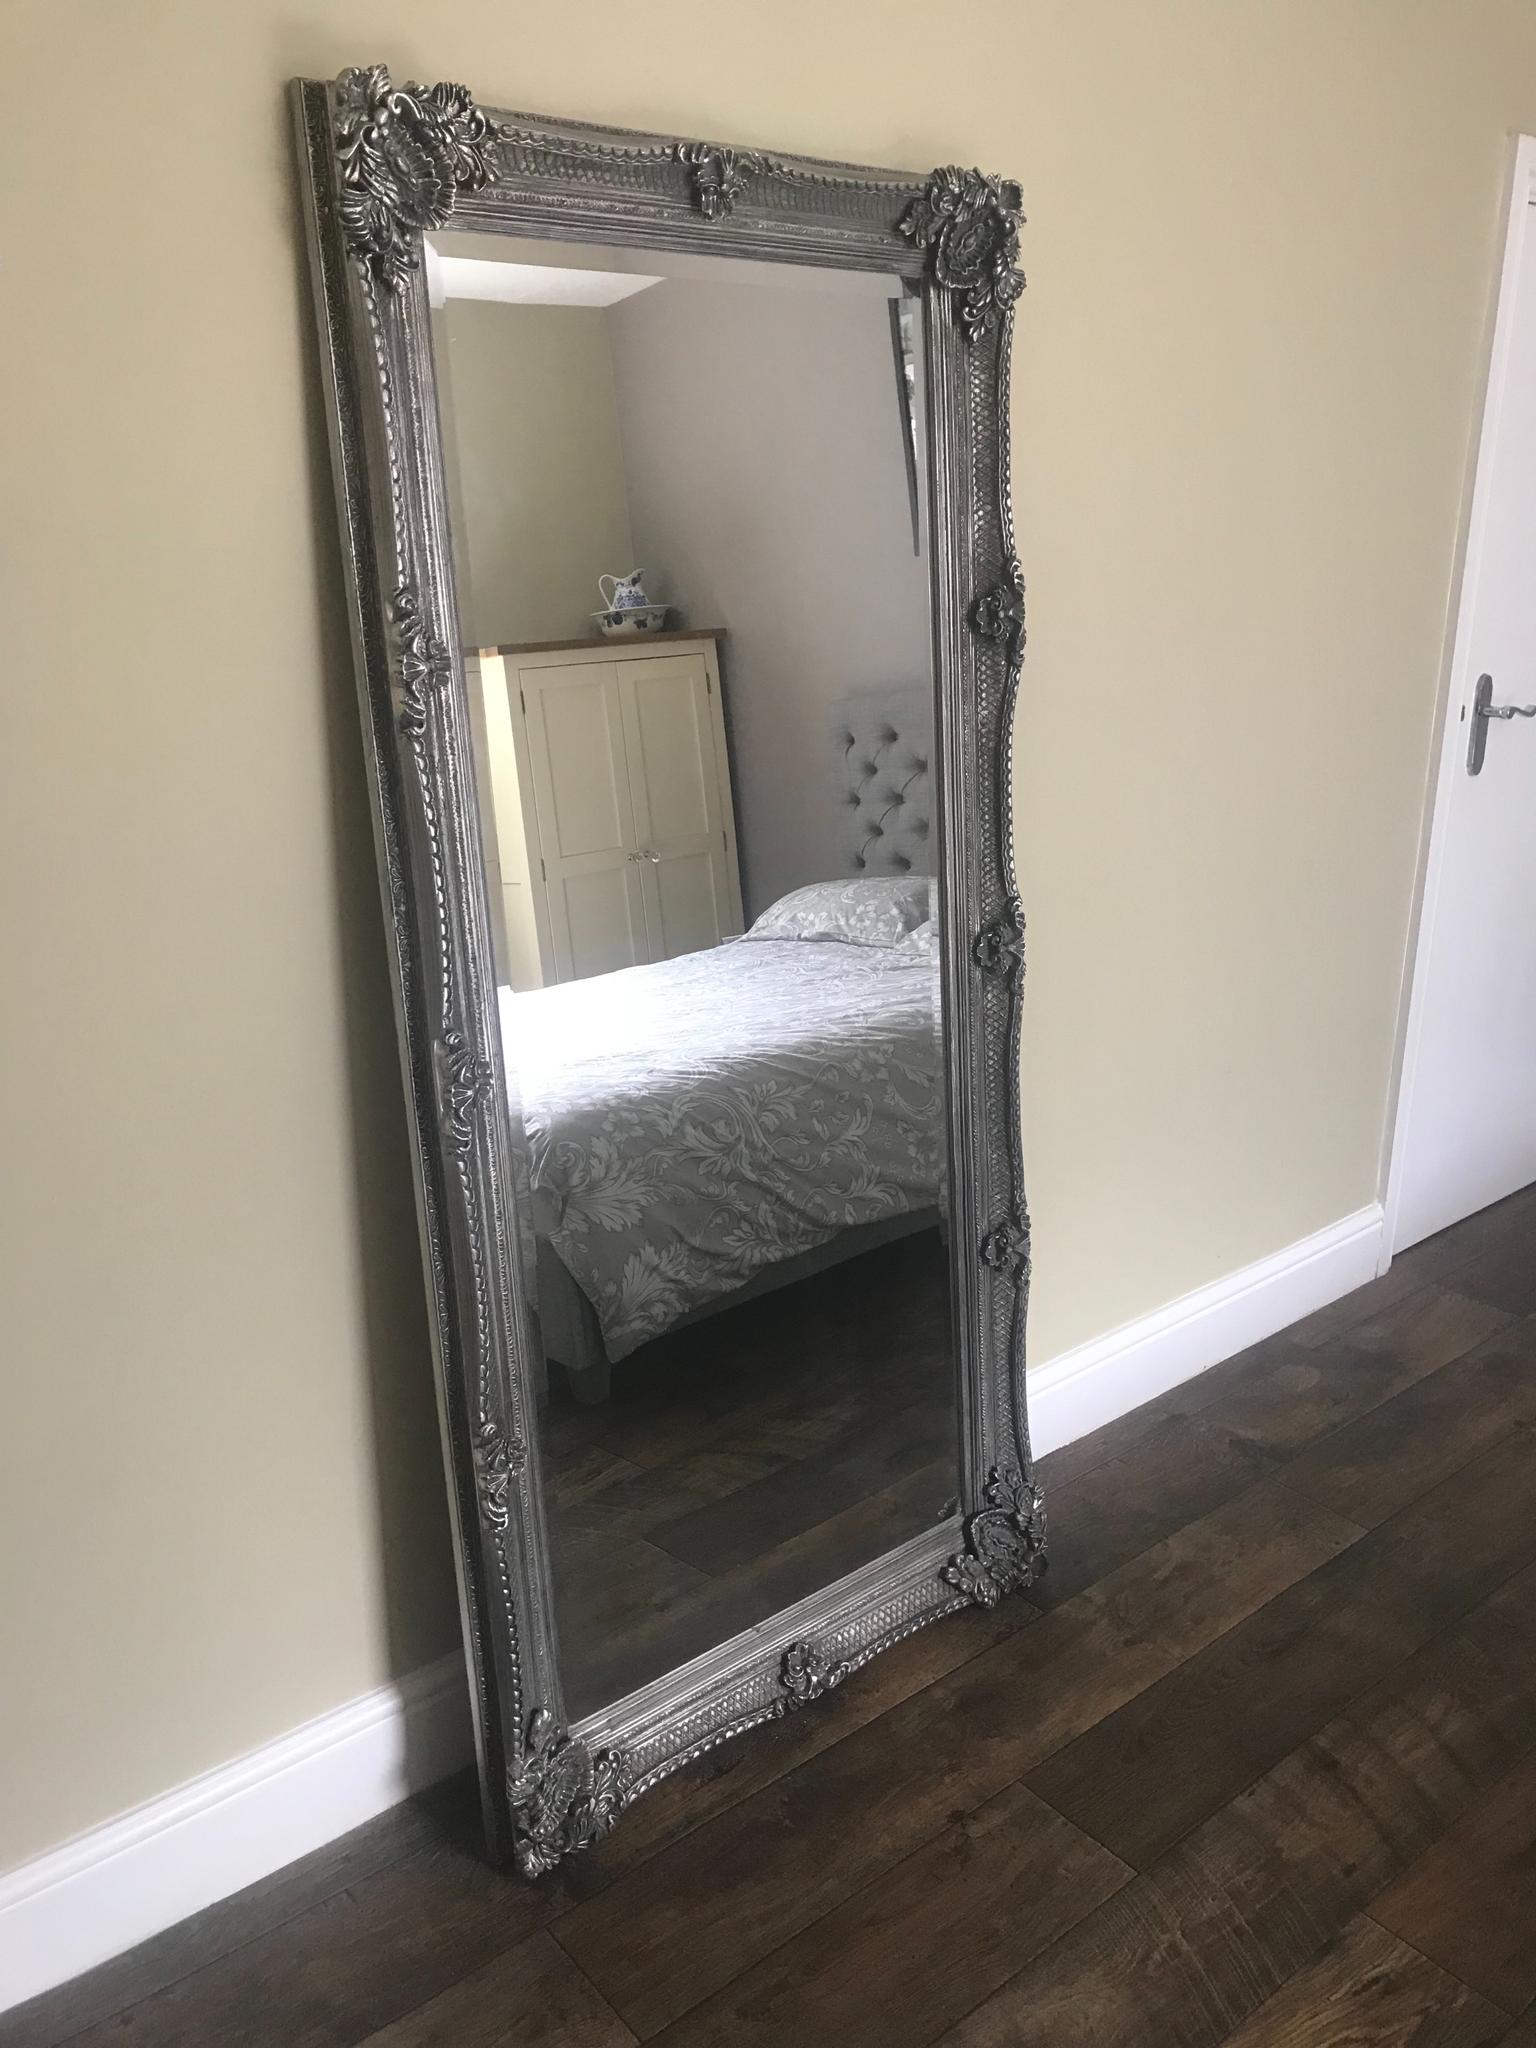 Large Ornate Floor Standing Mirror In Me14 Maidstone For 80 00